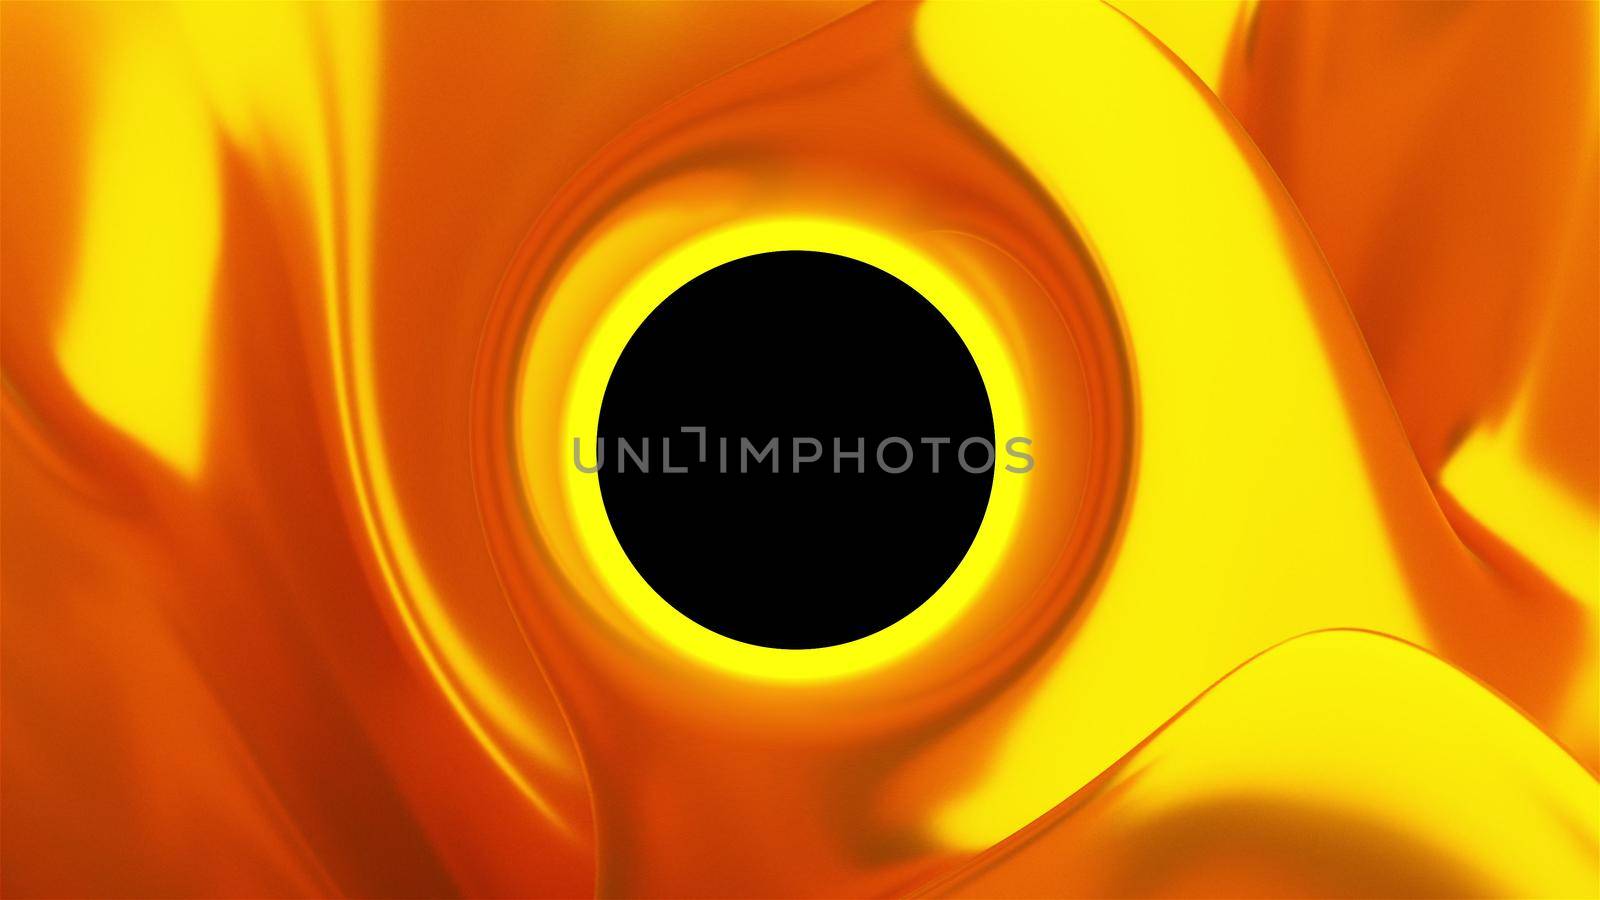 Black hole with gold backdrop by nolimit046